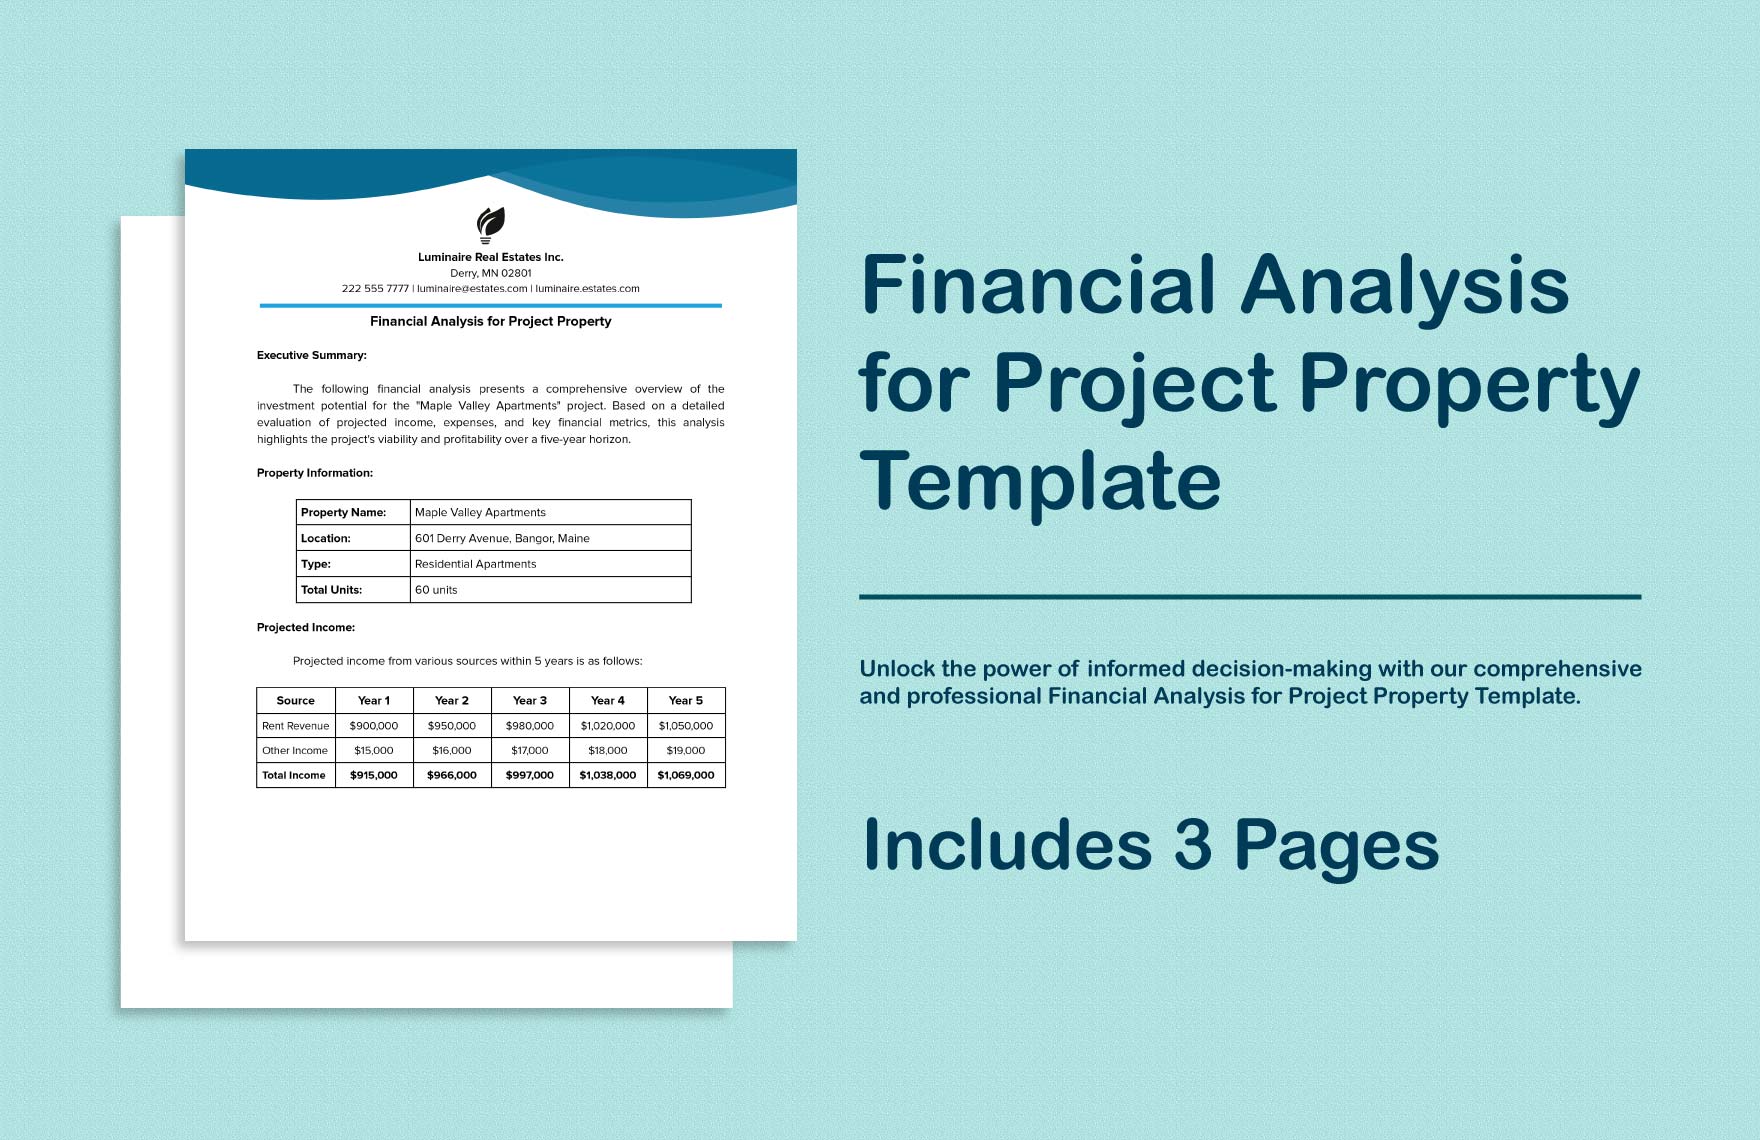 Financial Analysis for Project Property Template